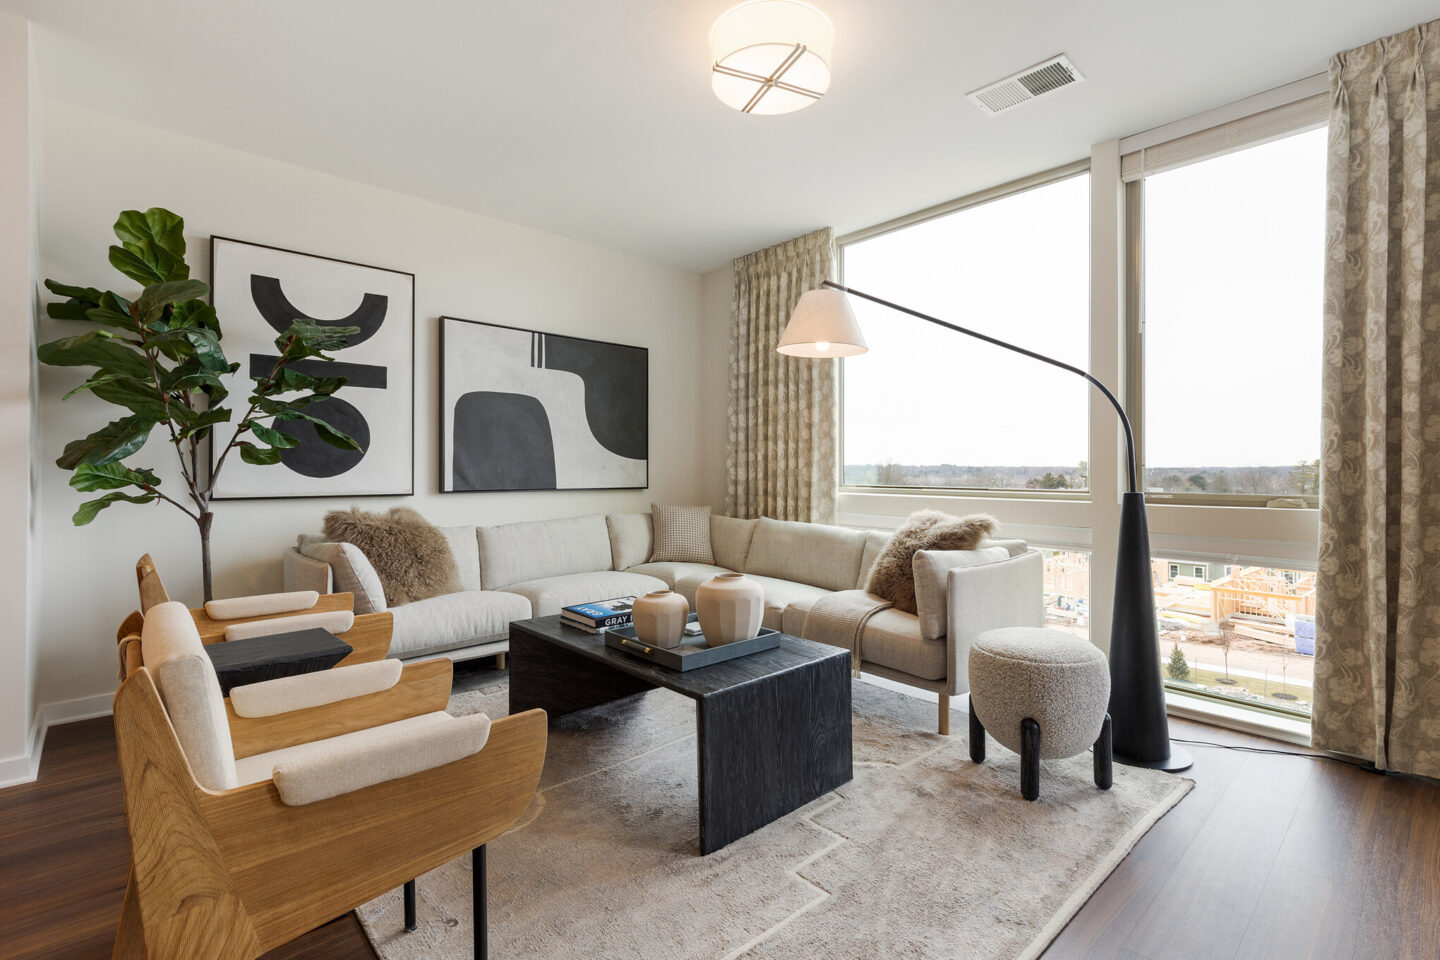 The 501 - 1BR - Living